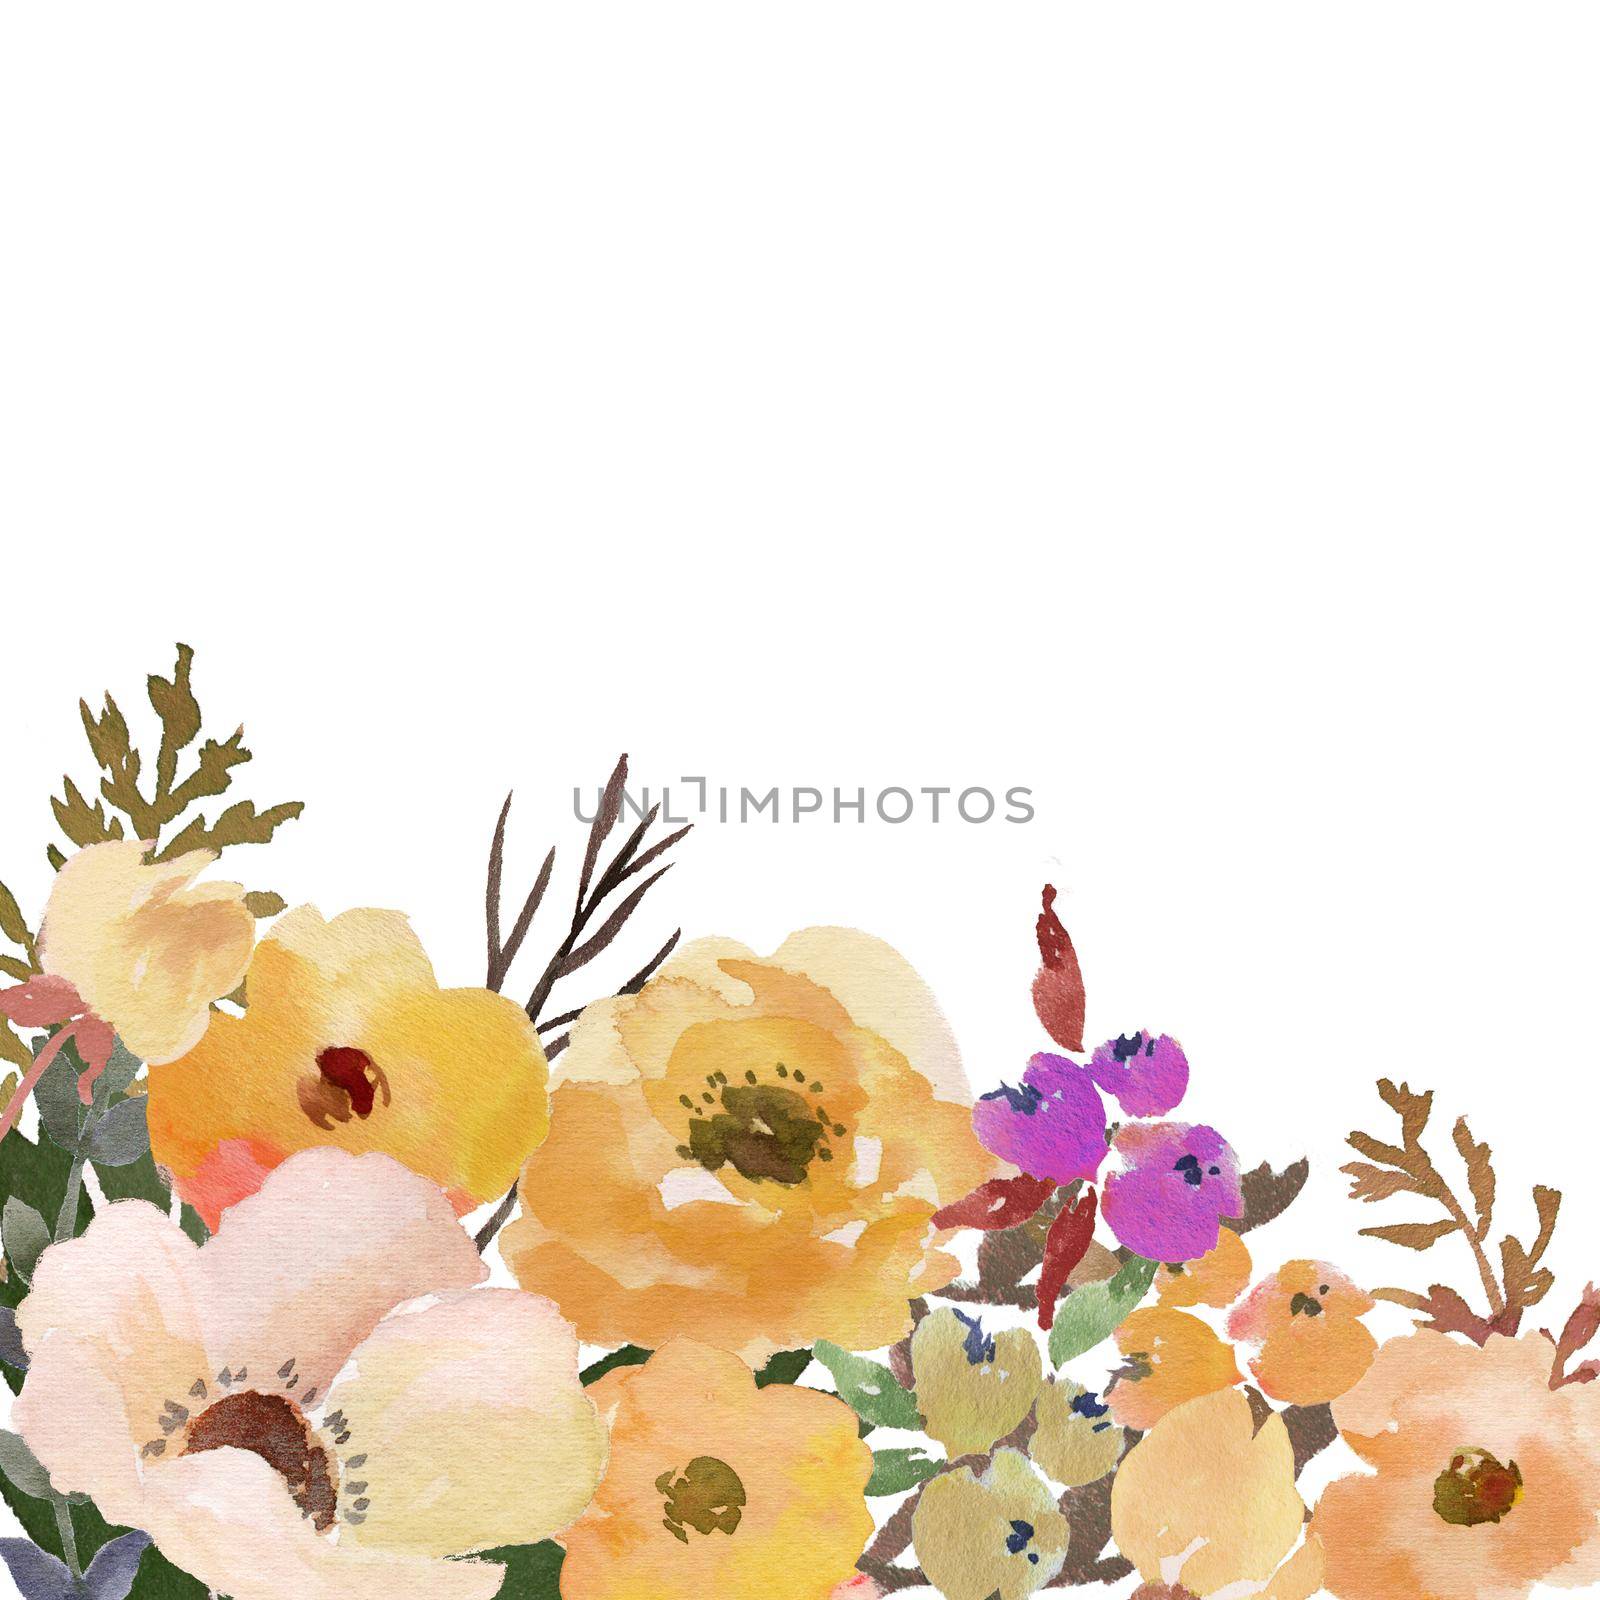 watercolor flower frame backgrounds. Isolated Illustration Botanical Flower on White background by ANITA